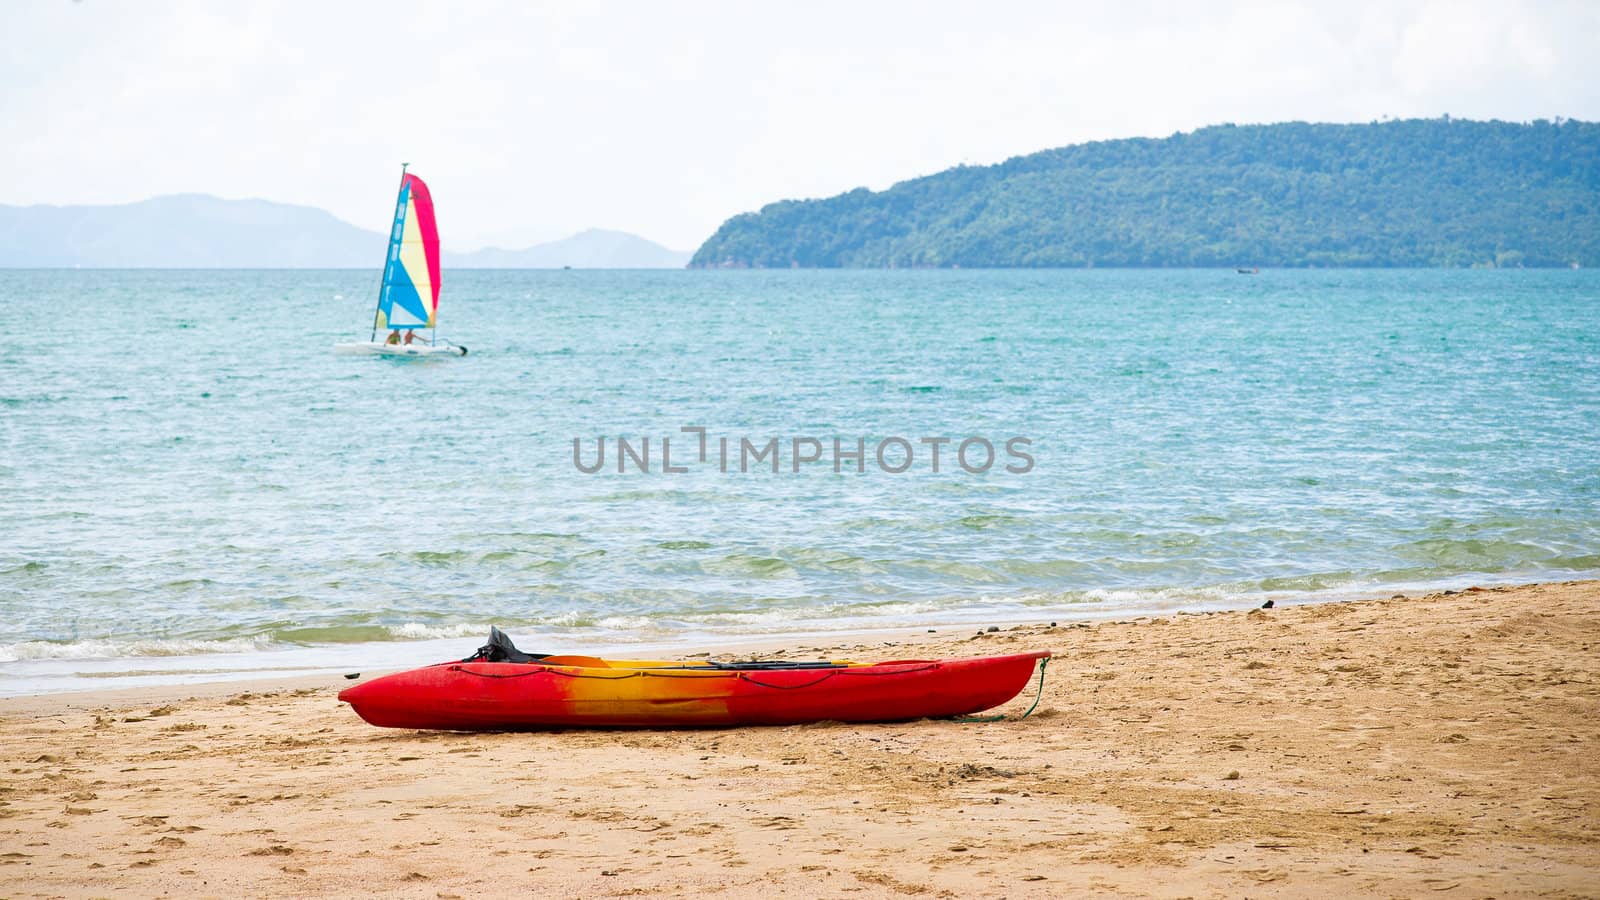 Sailing-boat in the sea and kayak on the beach